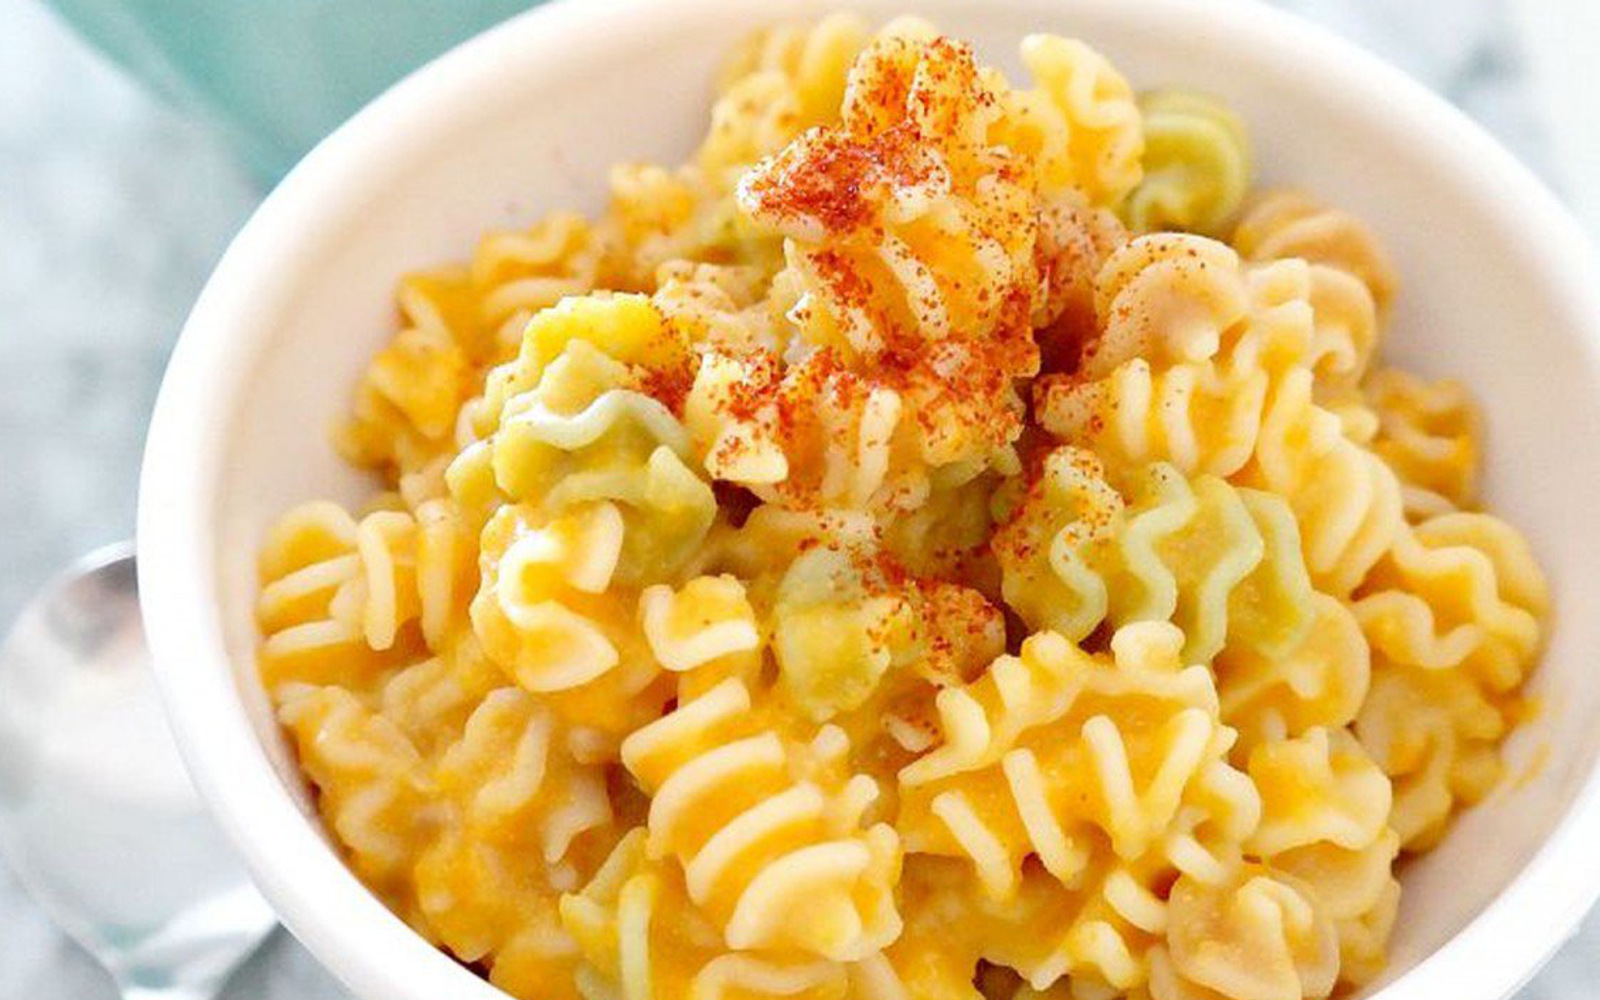 These 13 Nut-Free Sauces Are Rich, Creamy, and Delicious